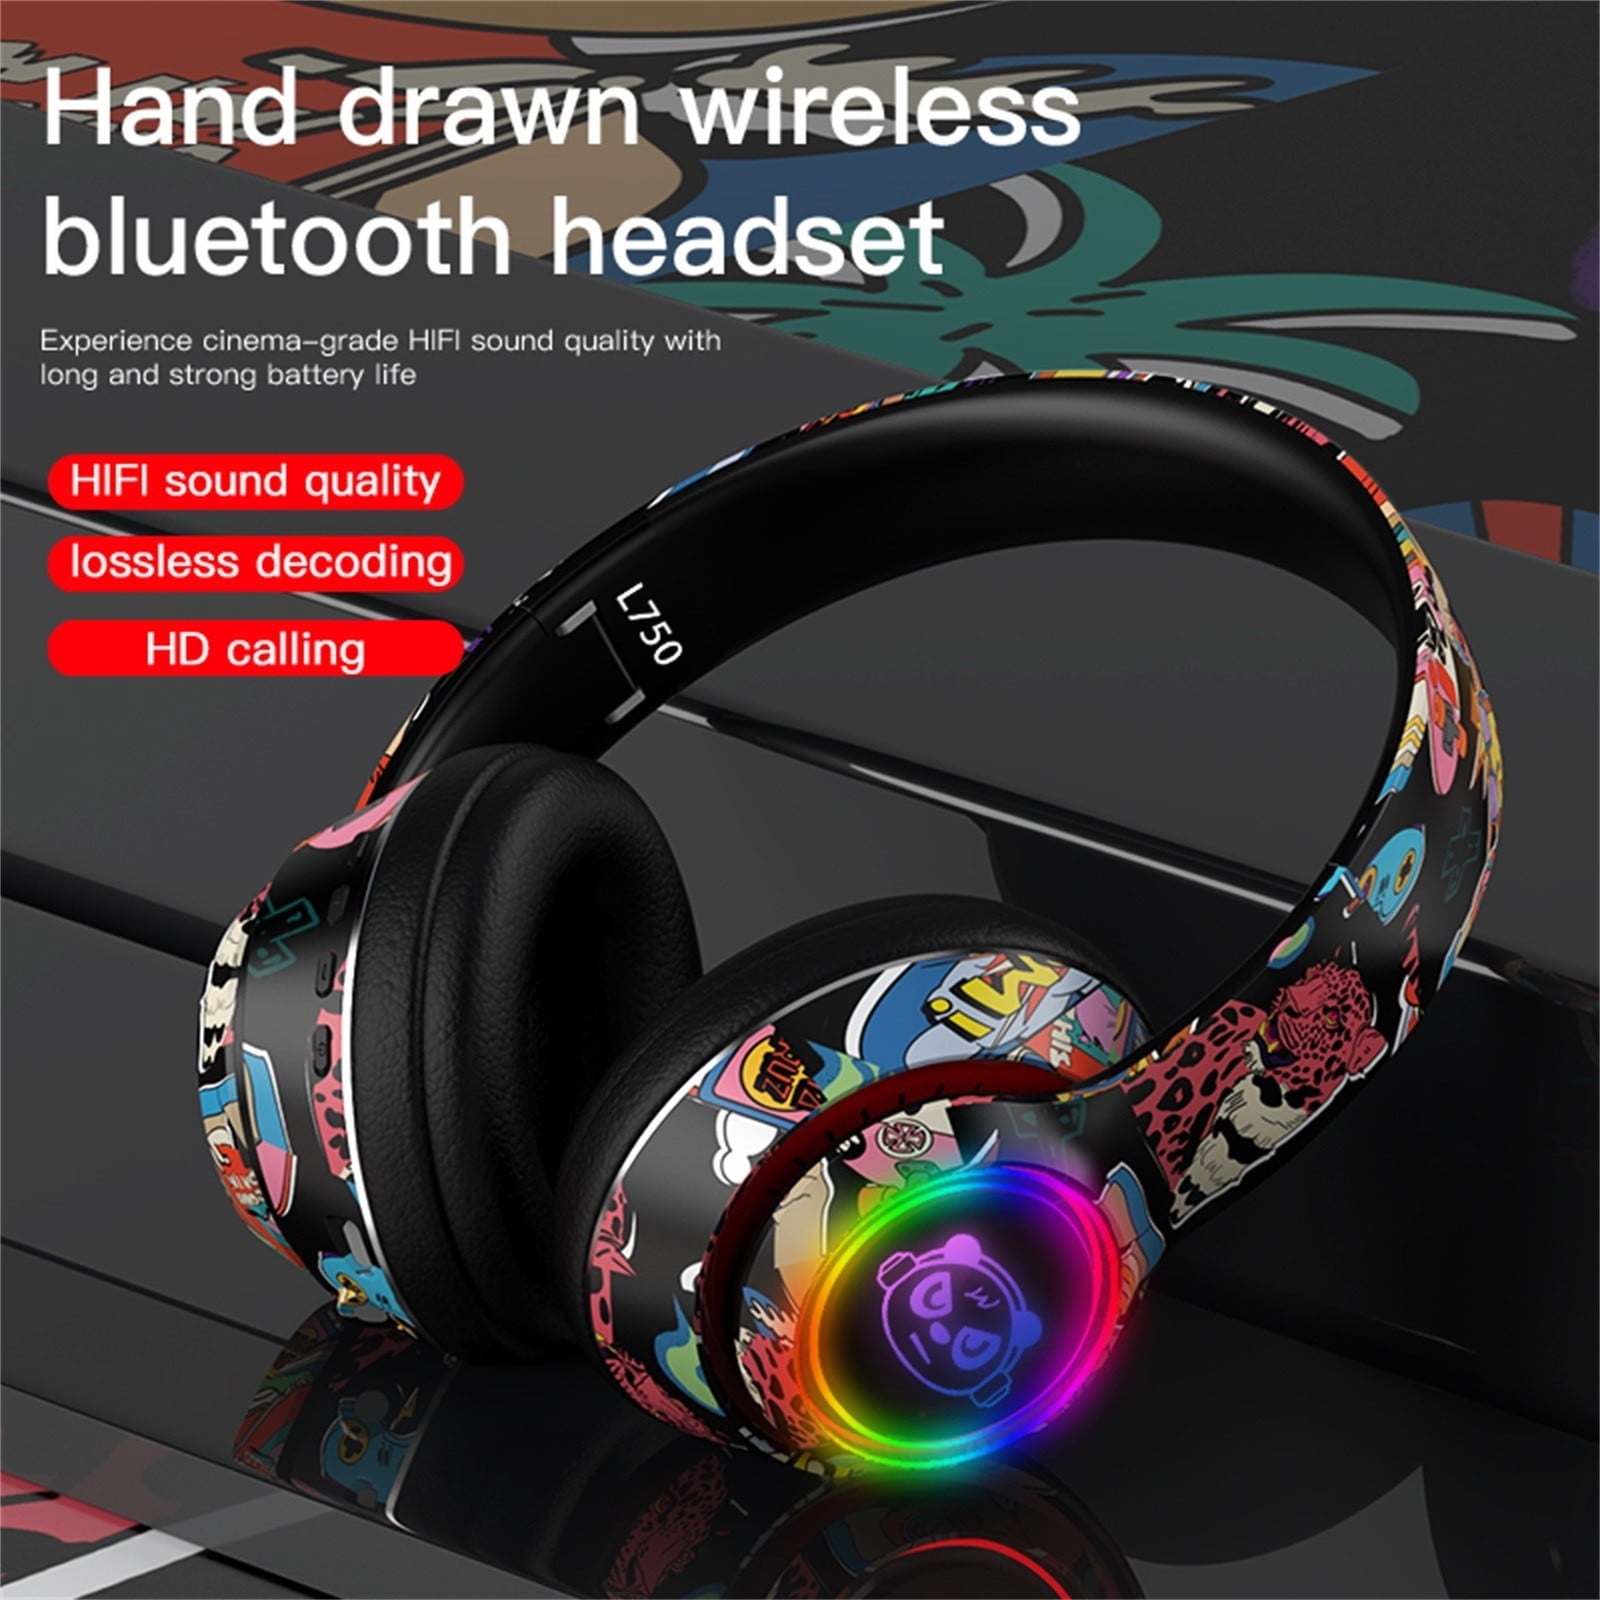 Kayannuo Clearance Wireless Bluetooth Cool Graffiti LED Illuminated Gaming Headset for Kids Teens Adults, Headphones with Built-In Microphone